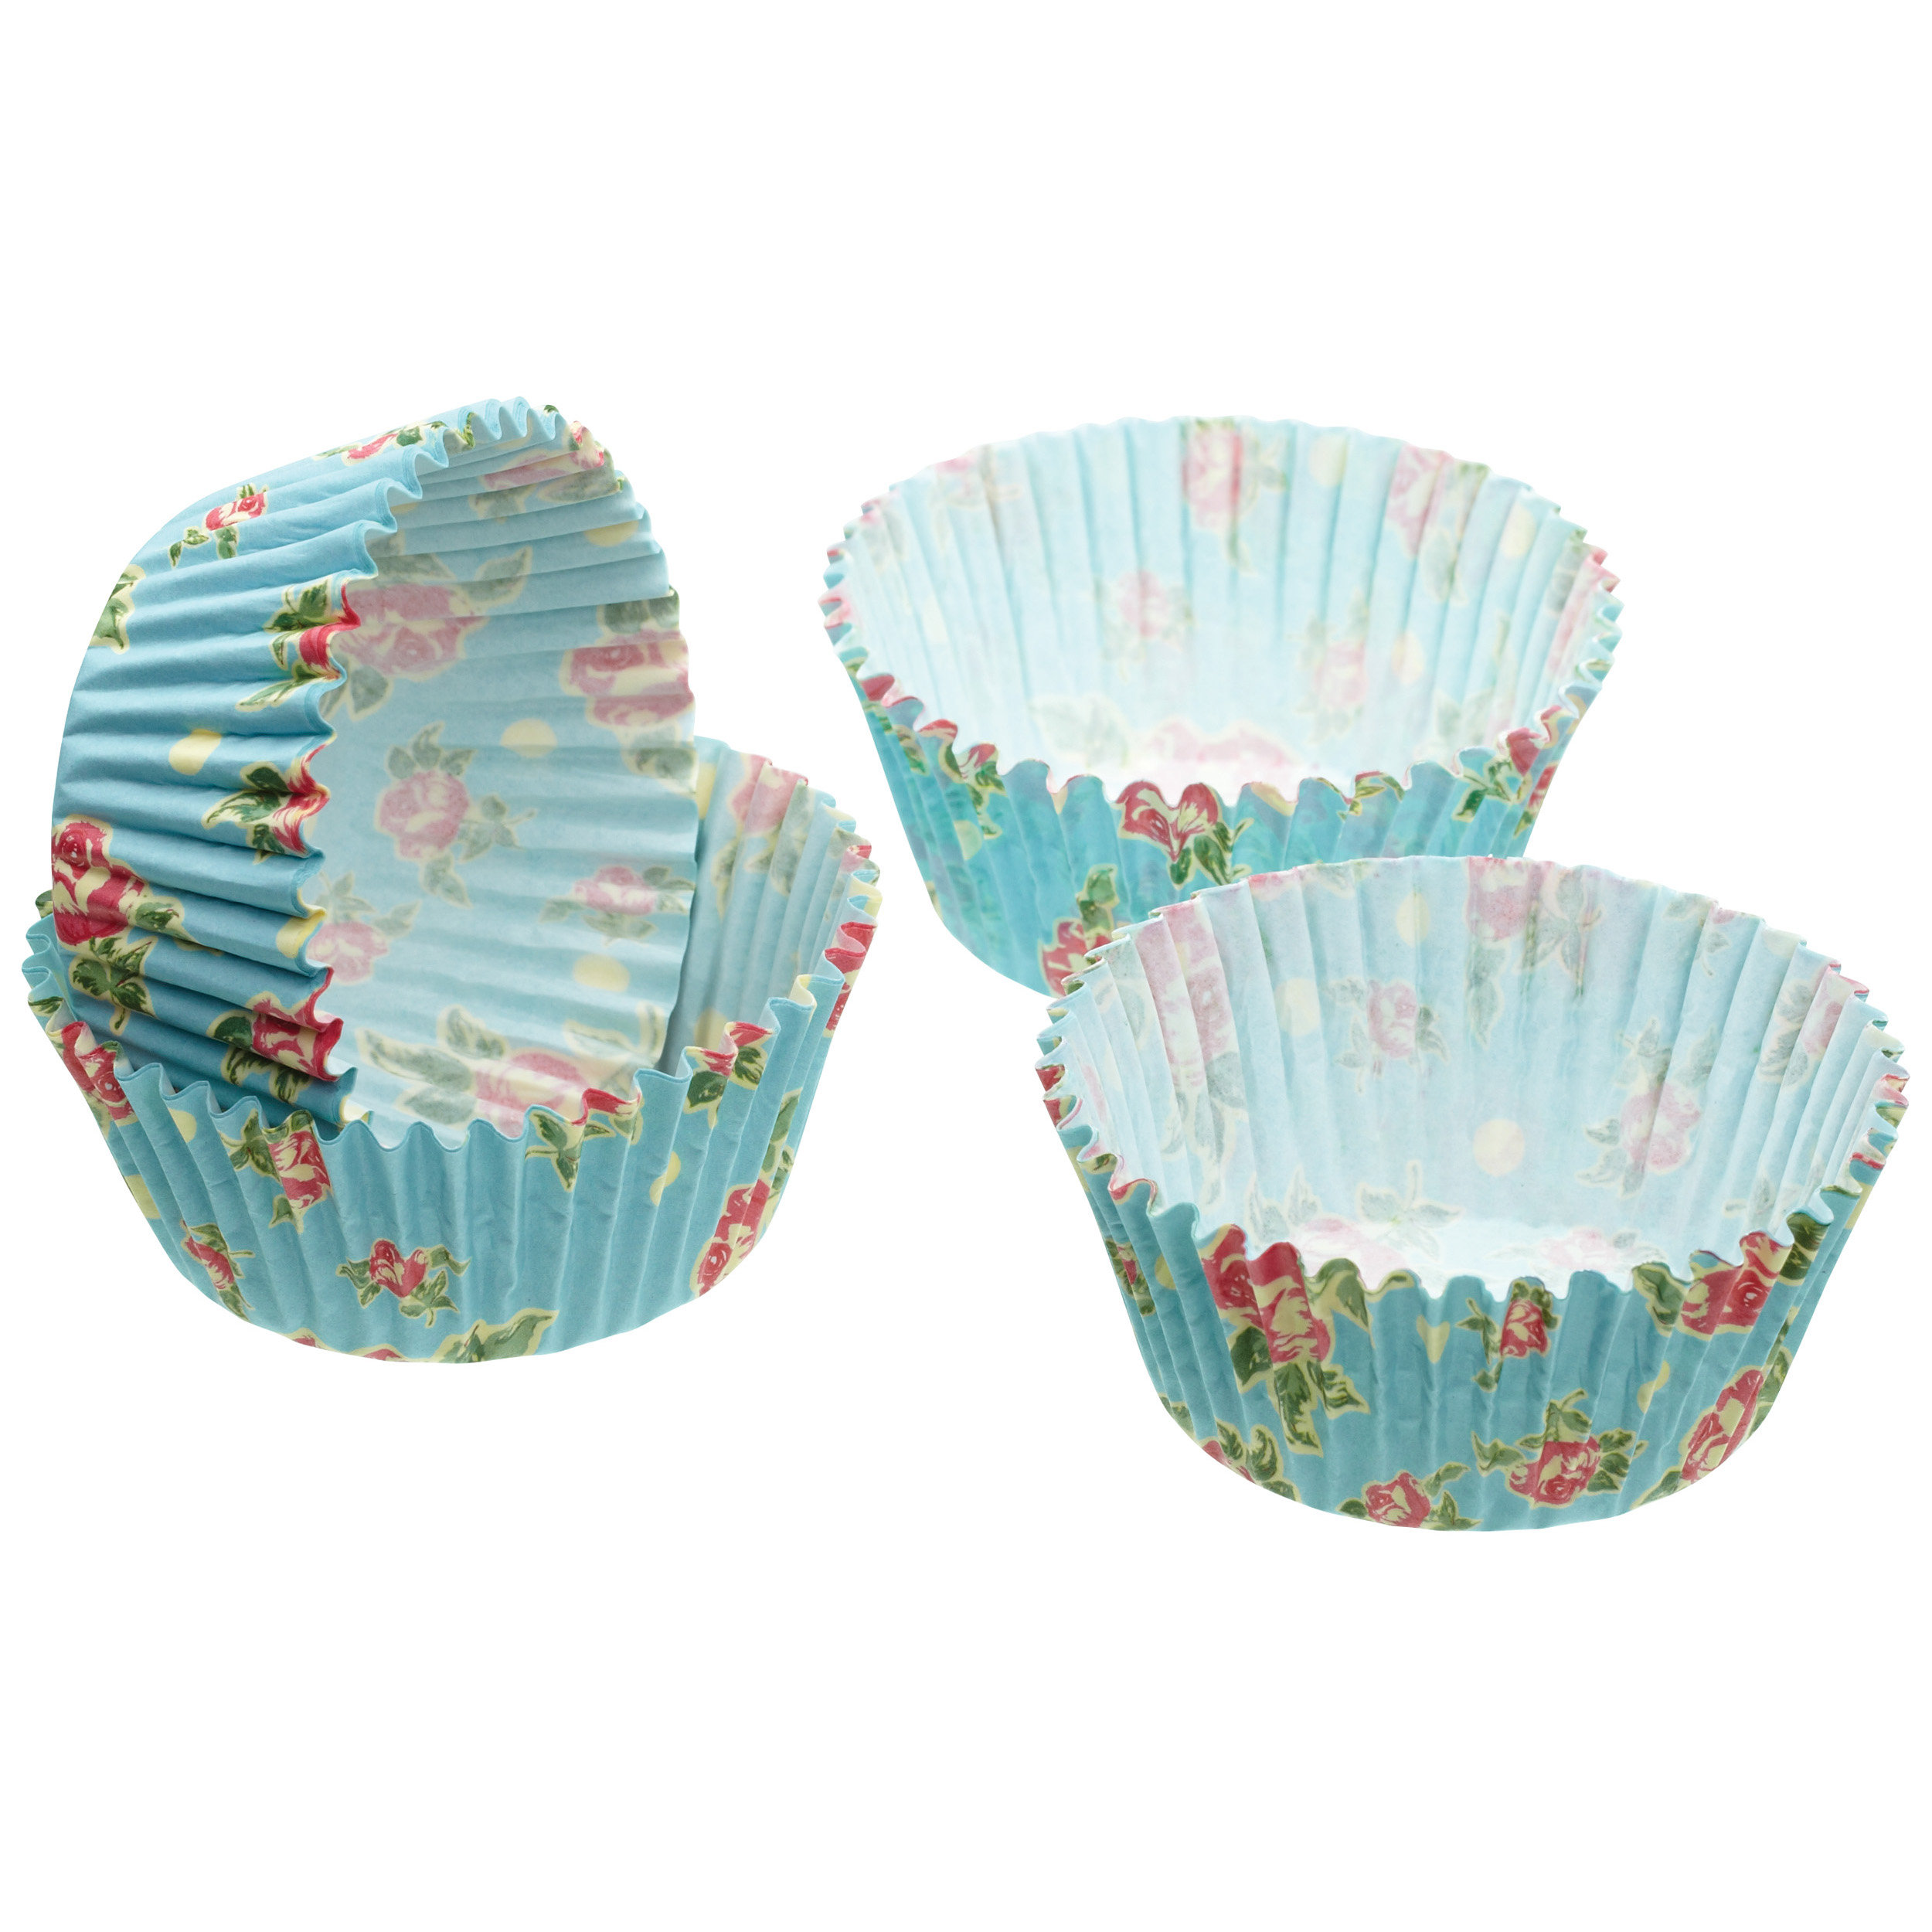 KitchenCraft Sweetly Does It Decorating Nails Set of 4